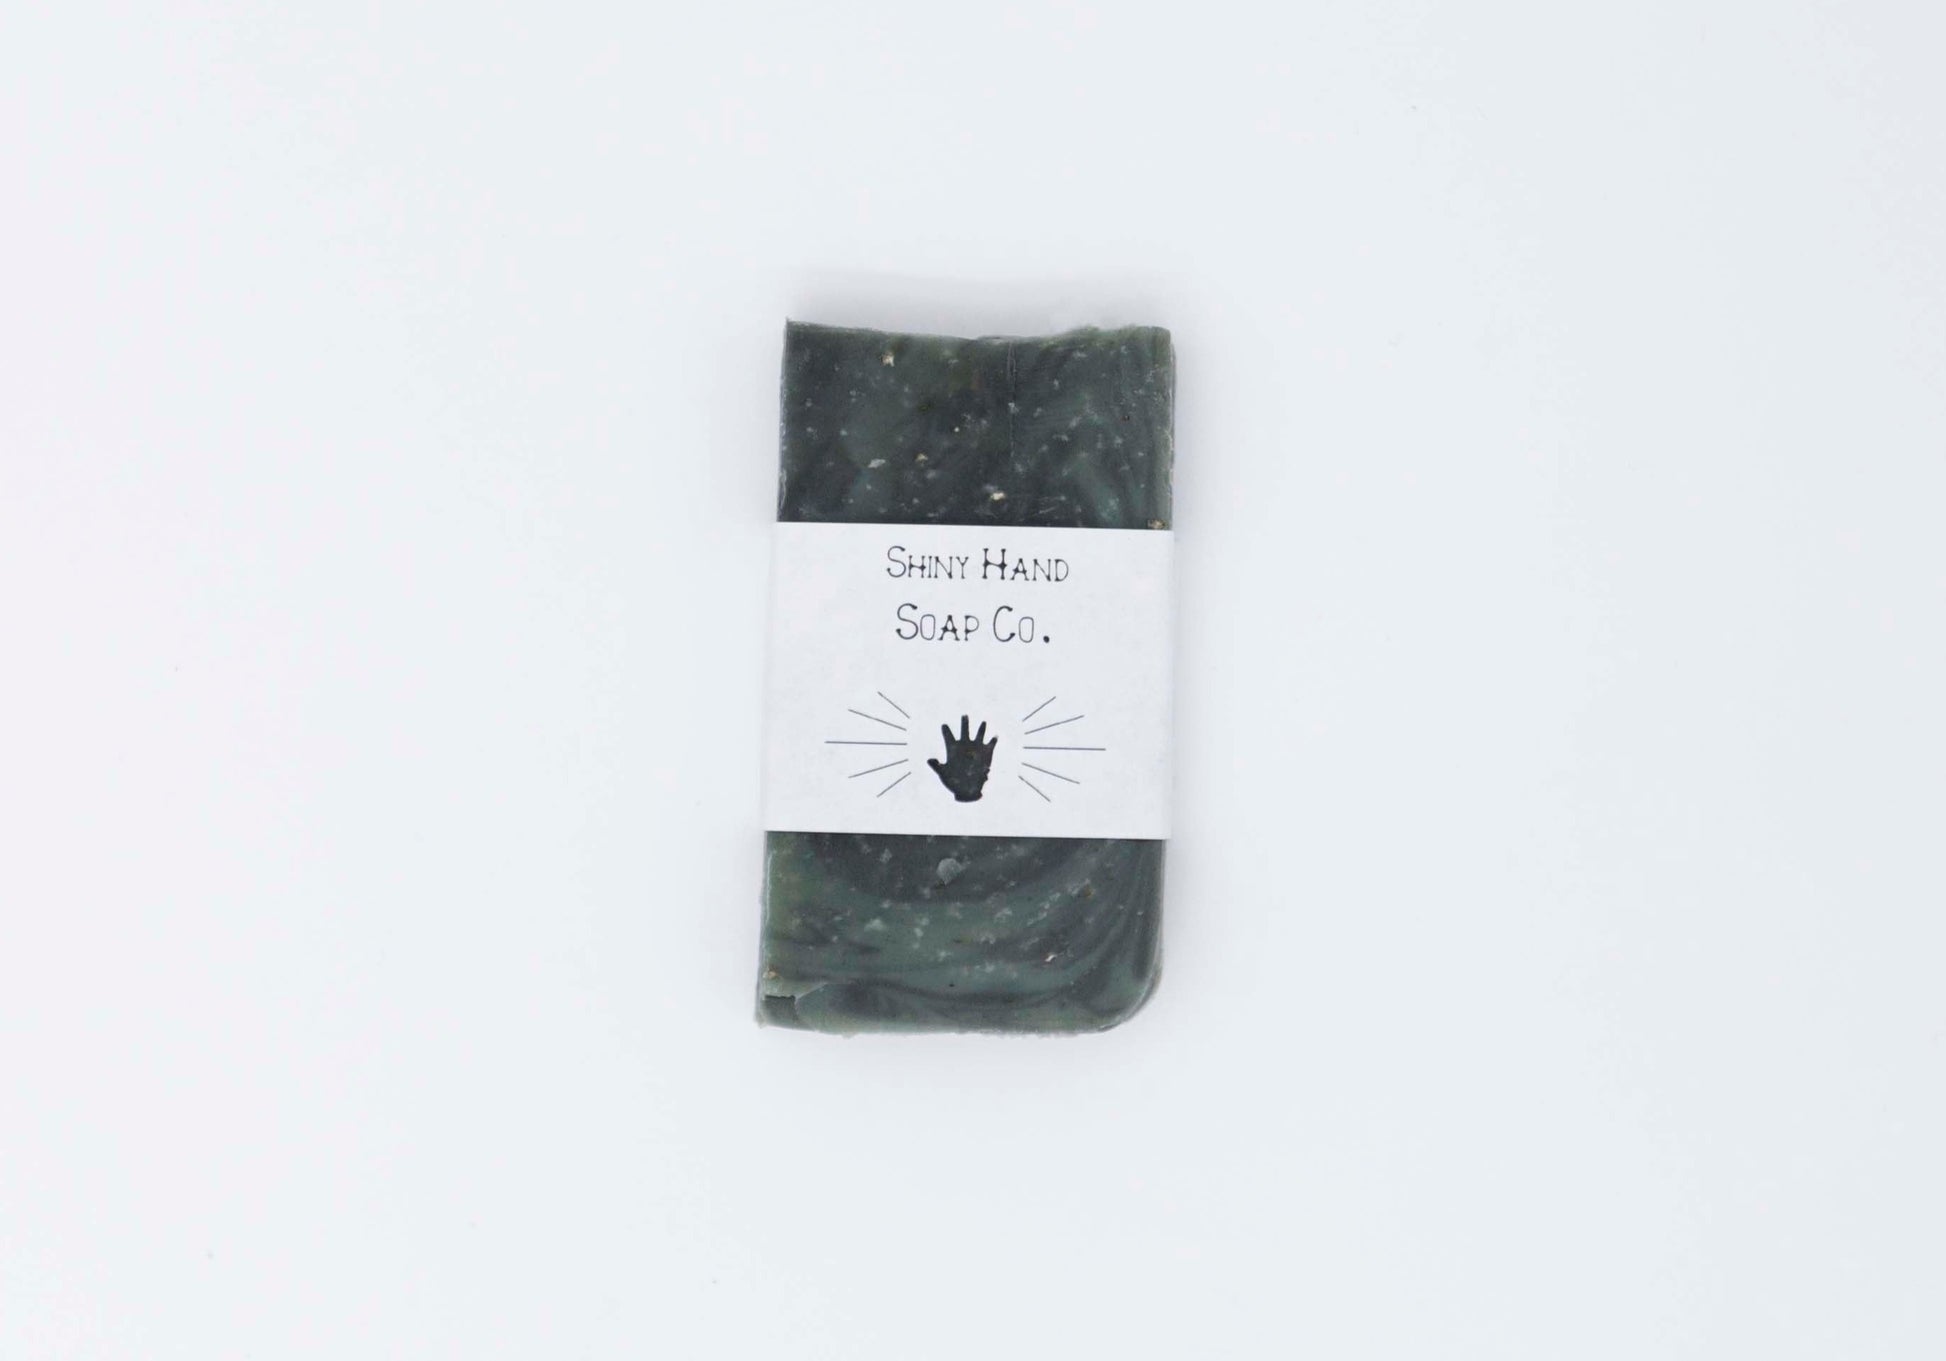 One miniature Hunter dark green ancient wood bar soap with a dark grey marbled swirl pattern flecked with ivory colored organic oats sits on a clean white background with white paper wrapper that has a hand shape cut out of it.